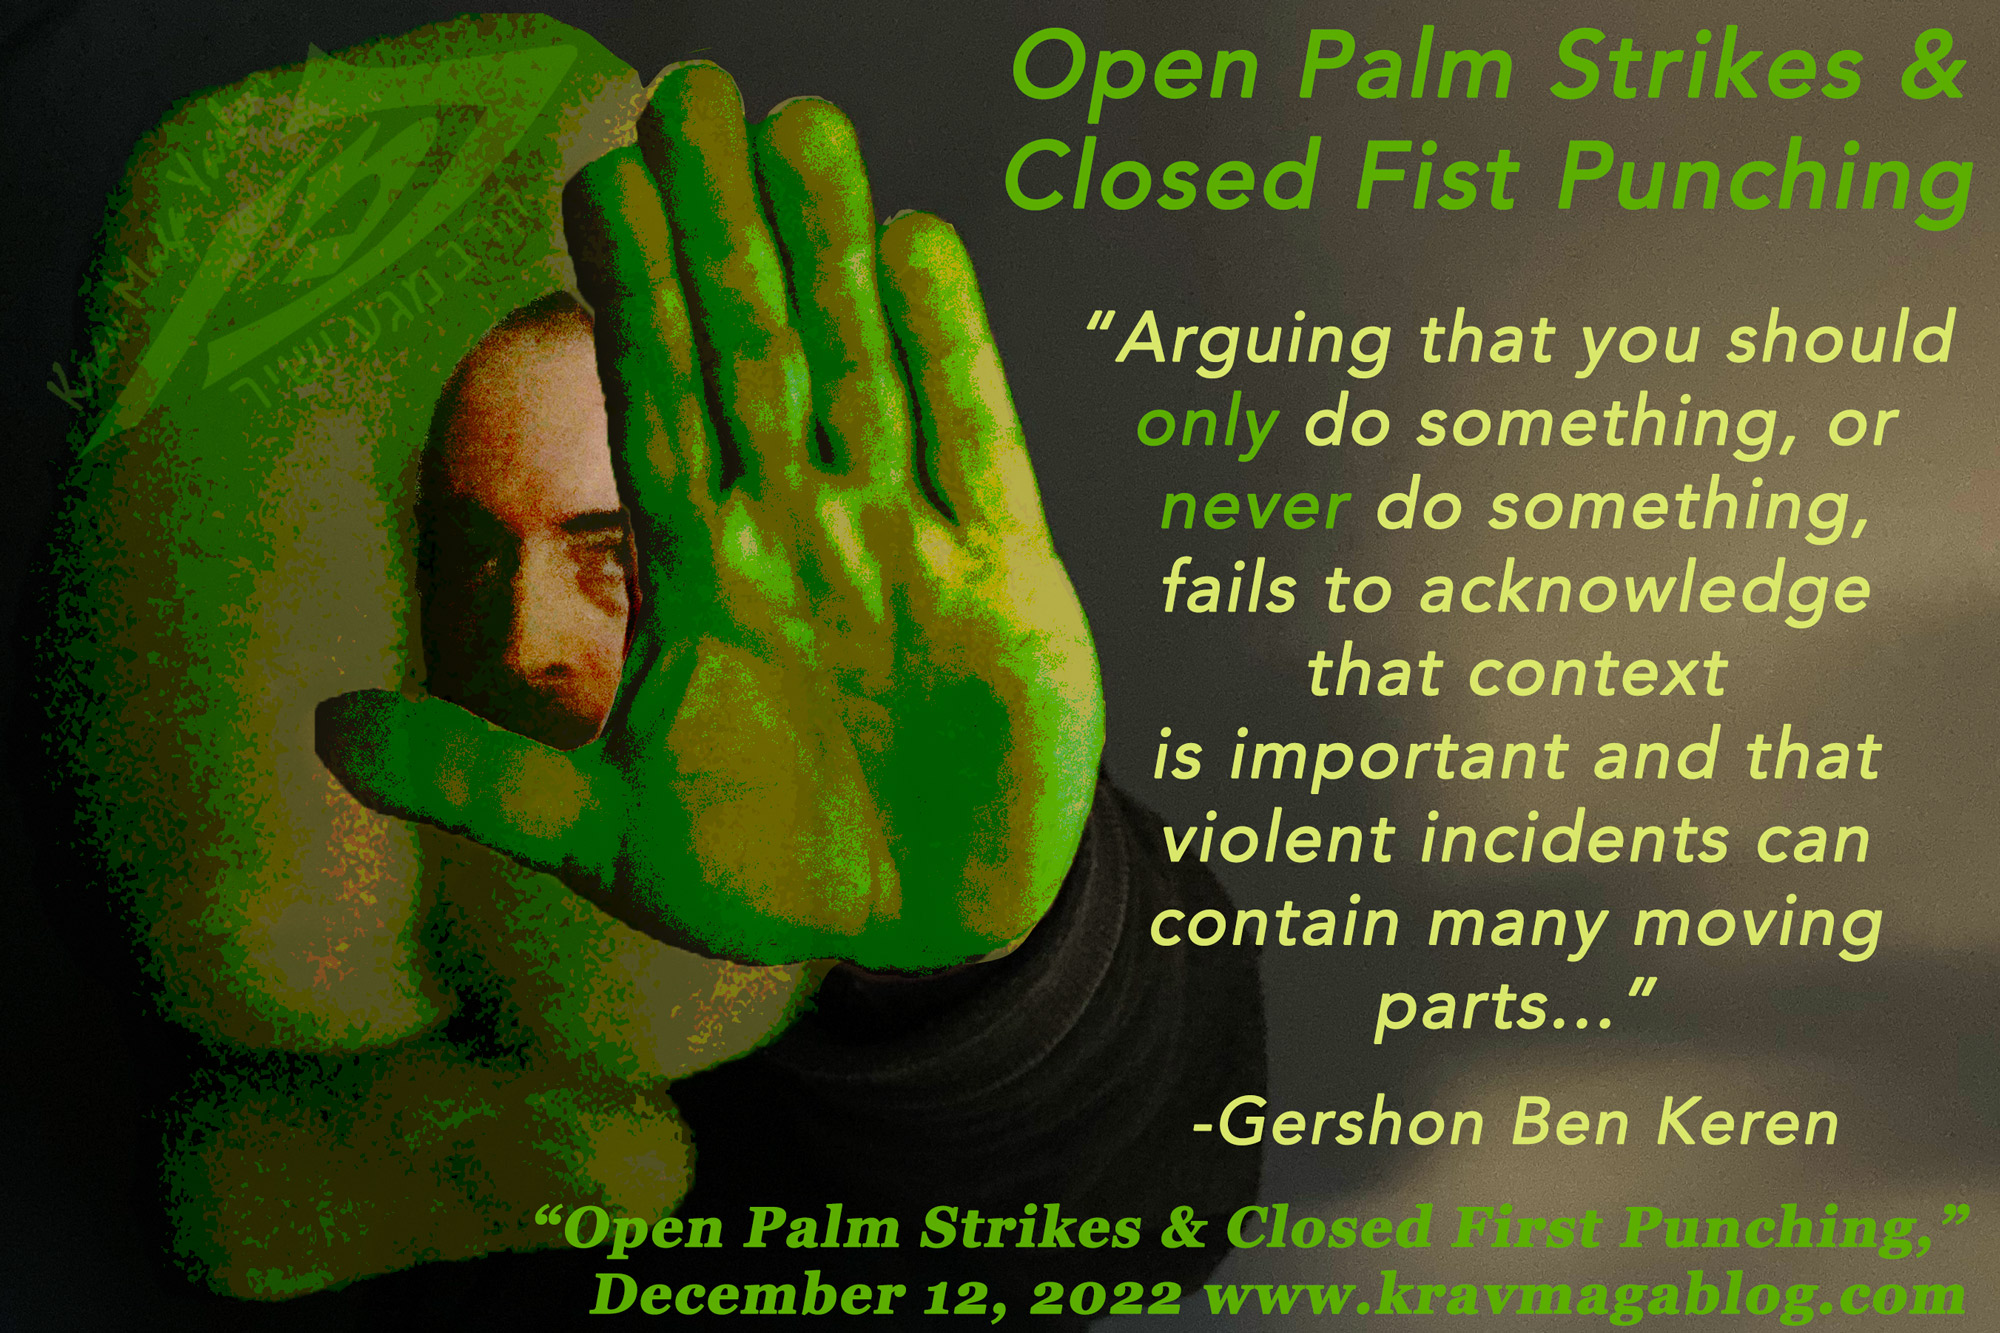 Blog About Open Palm Strikes & Closed Fist Punching